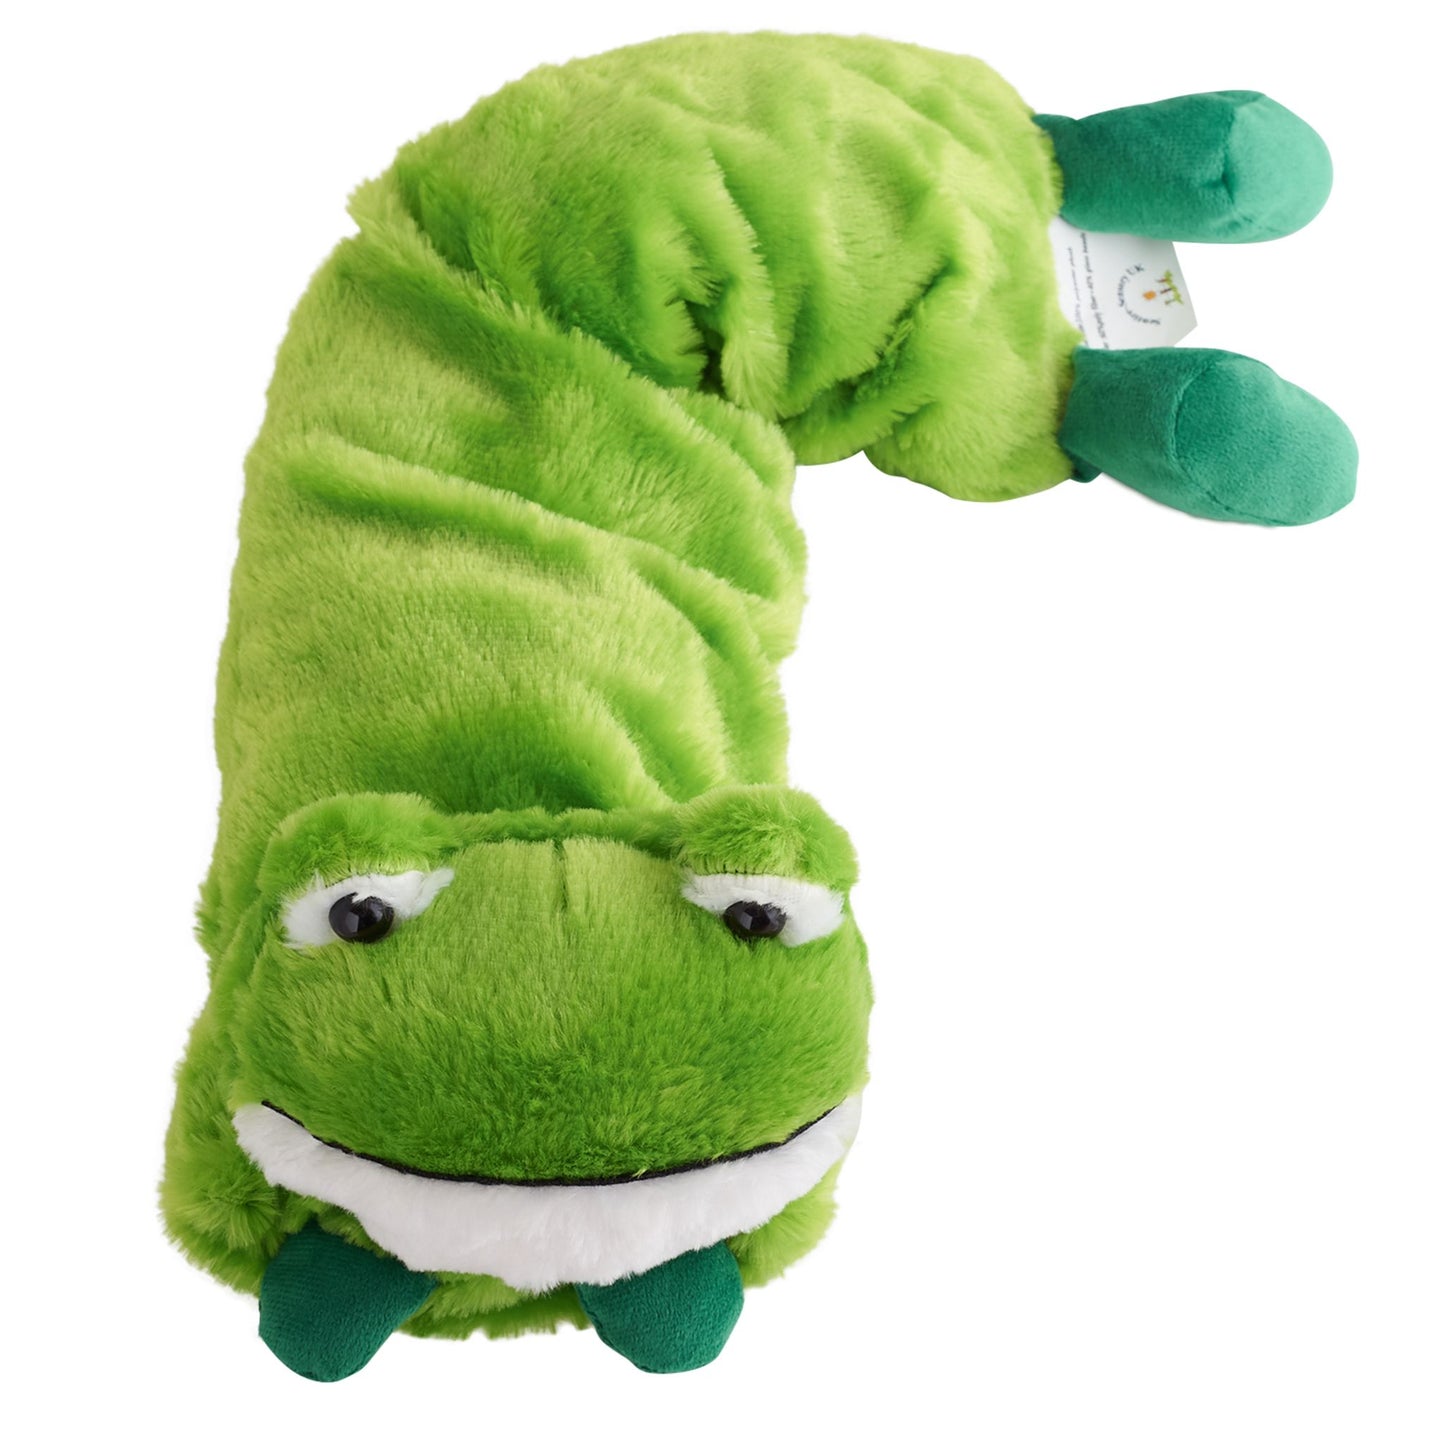 Freddie the Frog Weighted 2lb Pad for shoulders or Lap